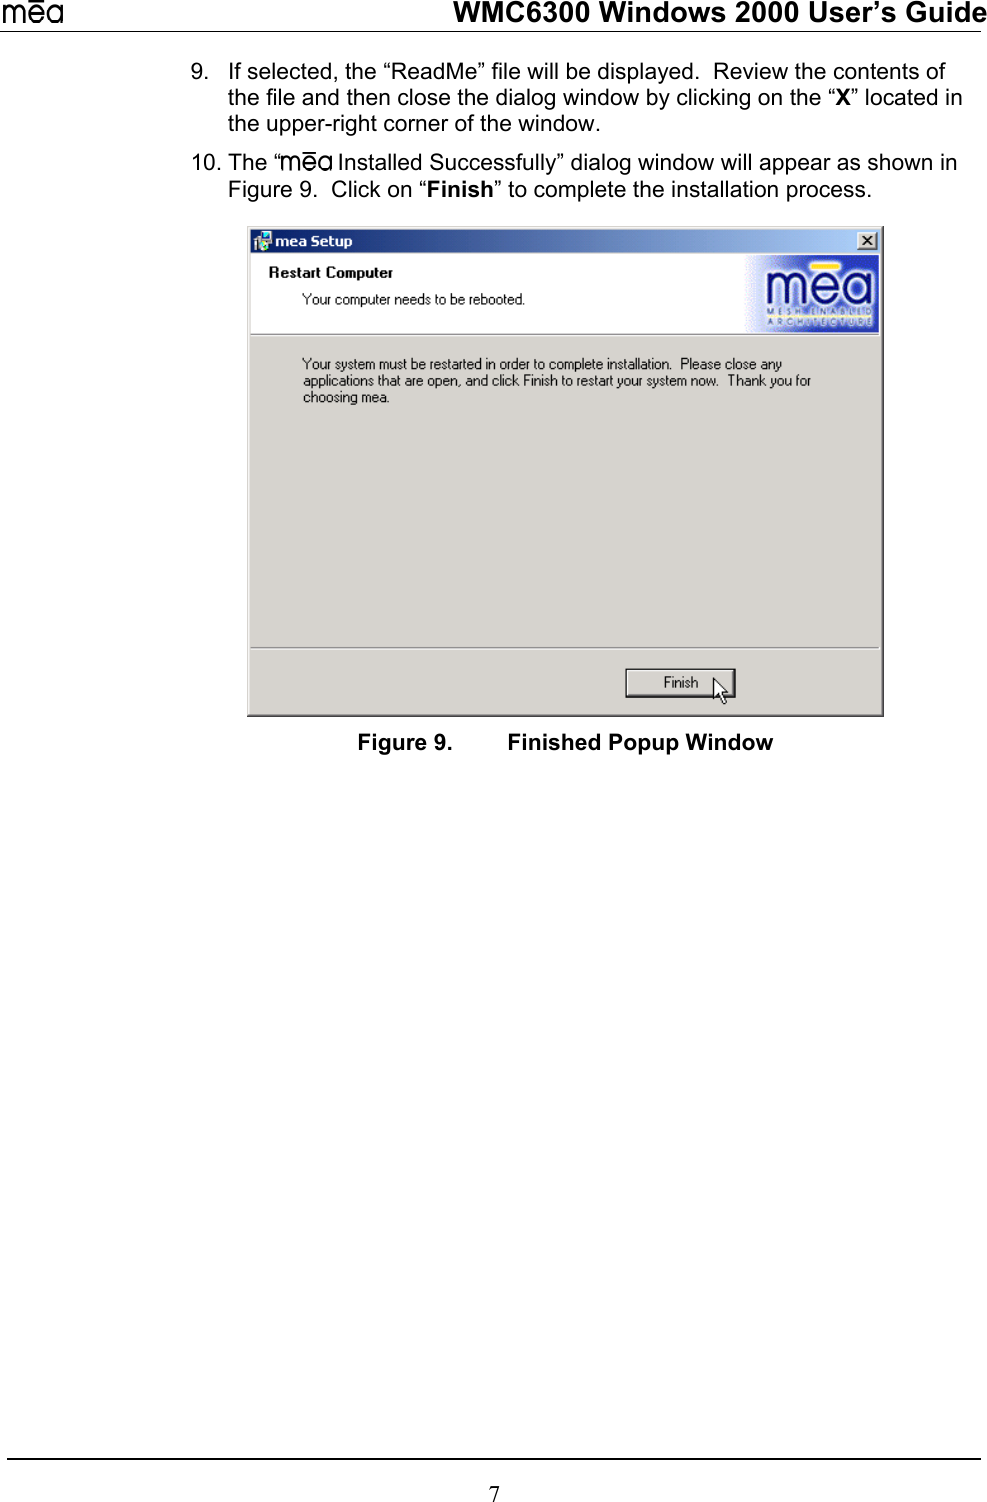   WMC6300 Windows 2000 User’s Guide 9. 10.If selected, the “ReadMe” file will be displayed.  Review the contents of the file and then close the dialog window by clicking on the “X” located in the upper-right corner of the window.   The “  Installed Successfully” dialog window will appear as shown in Figure 9.  Click on “Finish” to complete the installation process.  Figure 9.  Finished Popup Window 7 